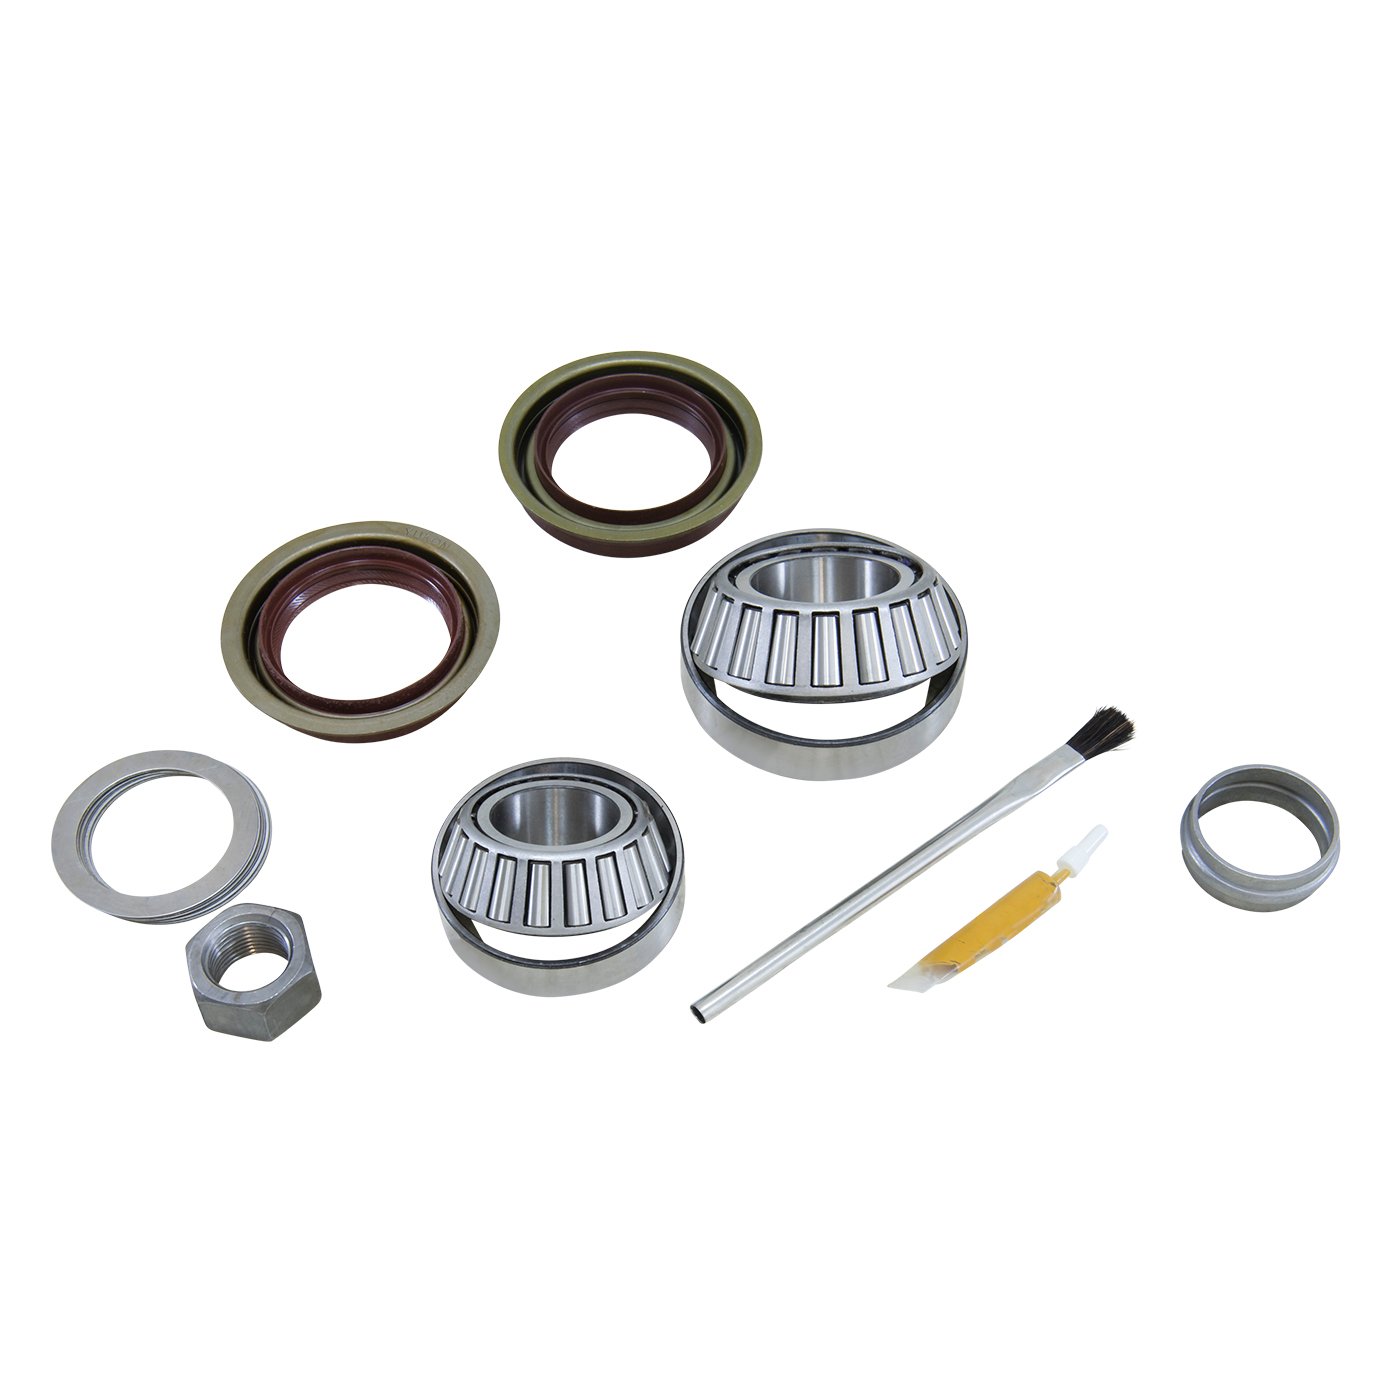 USA Standard ZPKD44 Pinion Installation Kit, For D44 Front